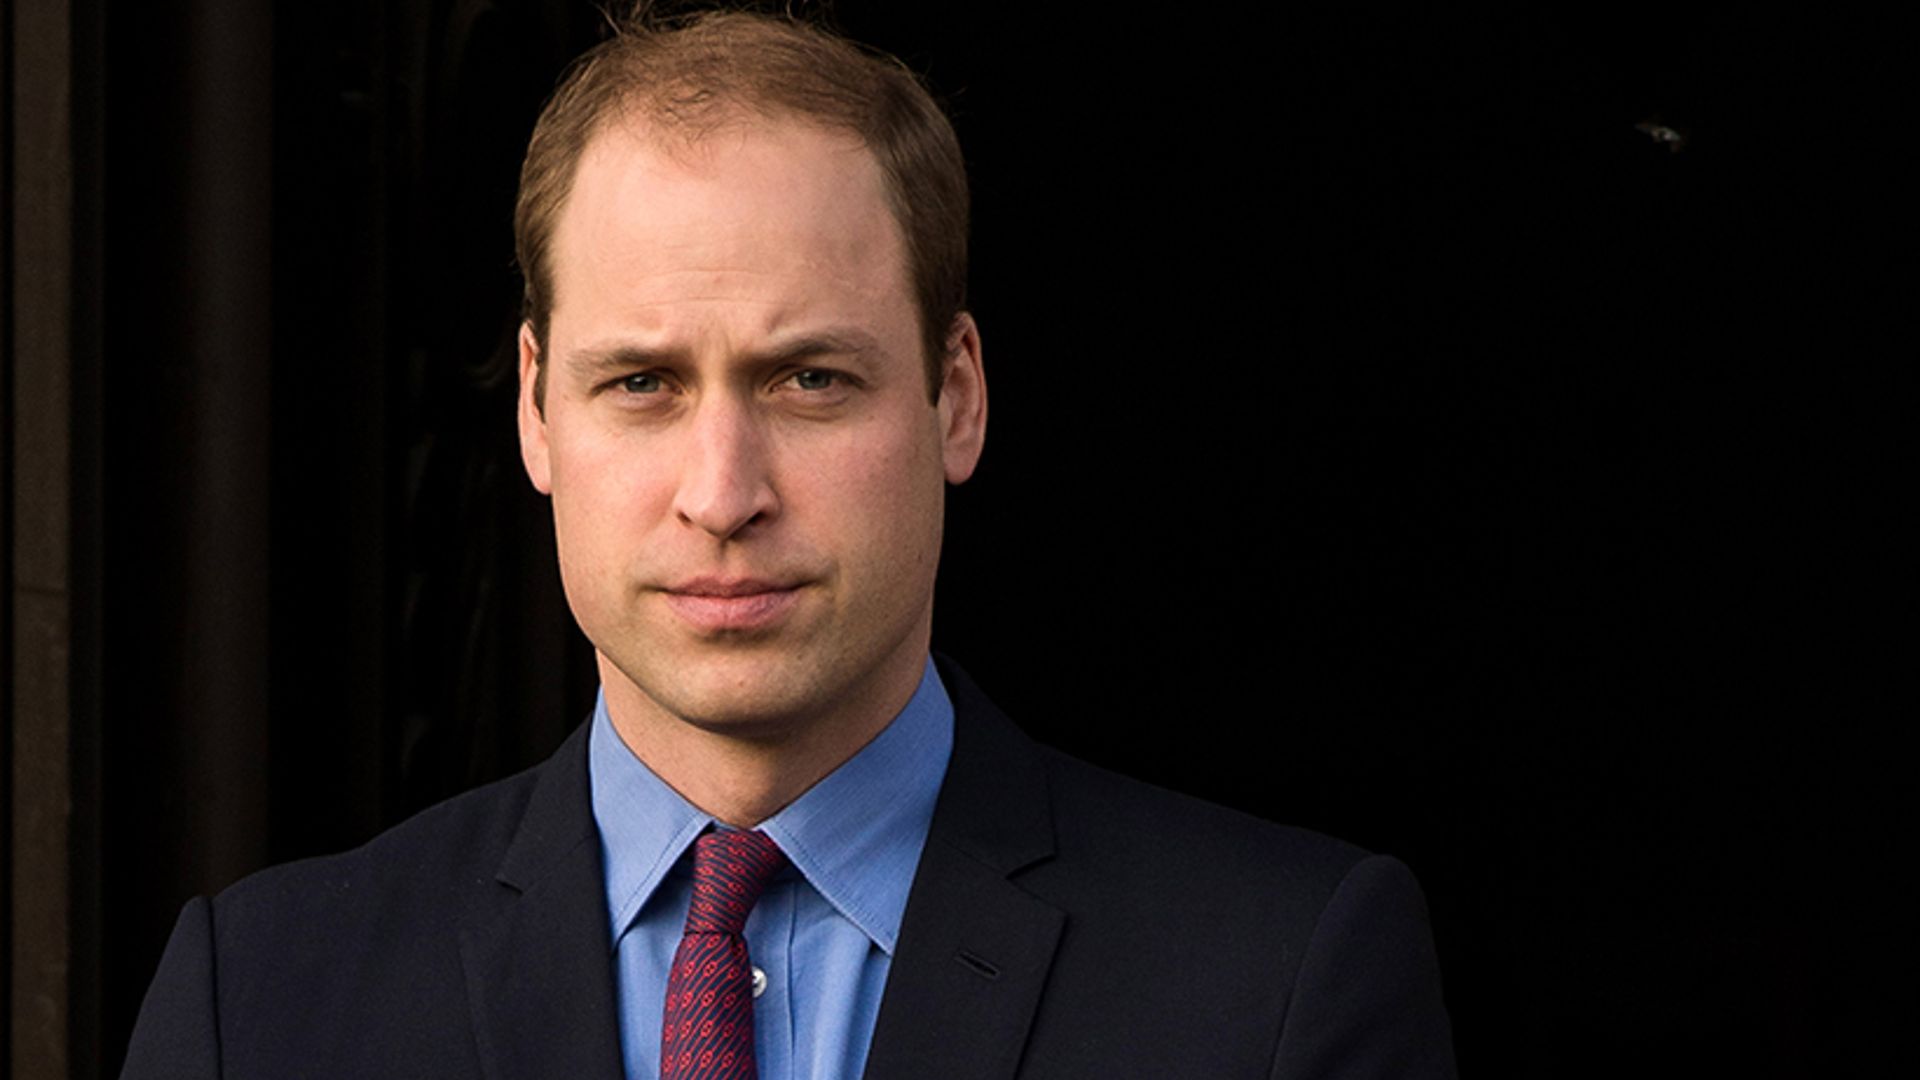 Prince William opens up about Princess Diana's bulimia battle